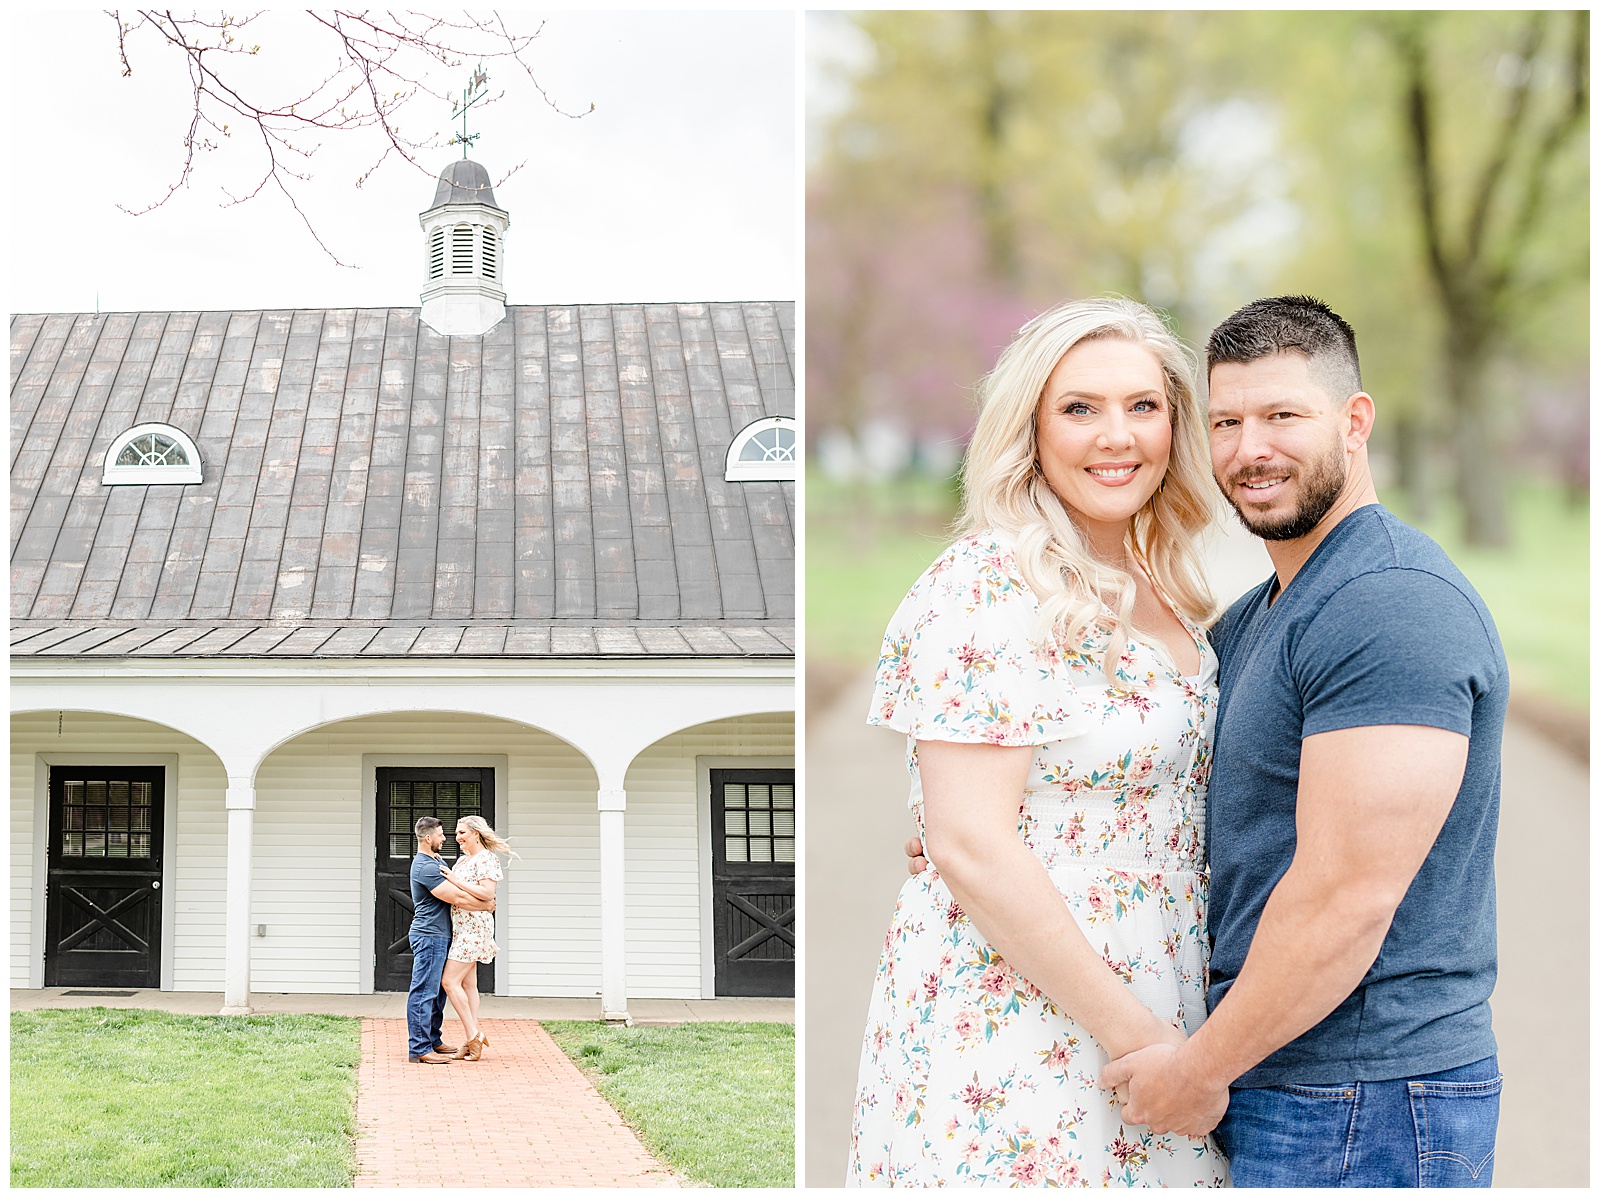 Queeny Park engagement session in front of stables